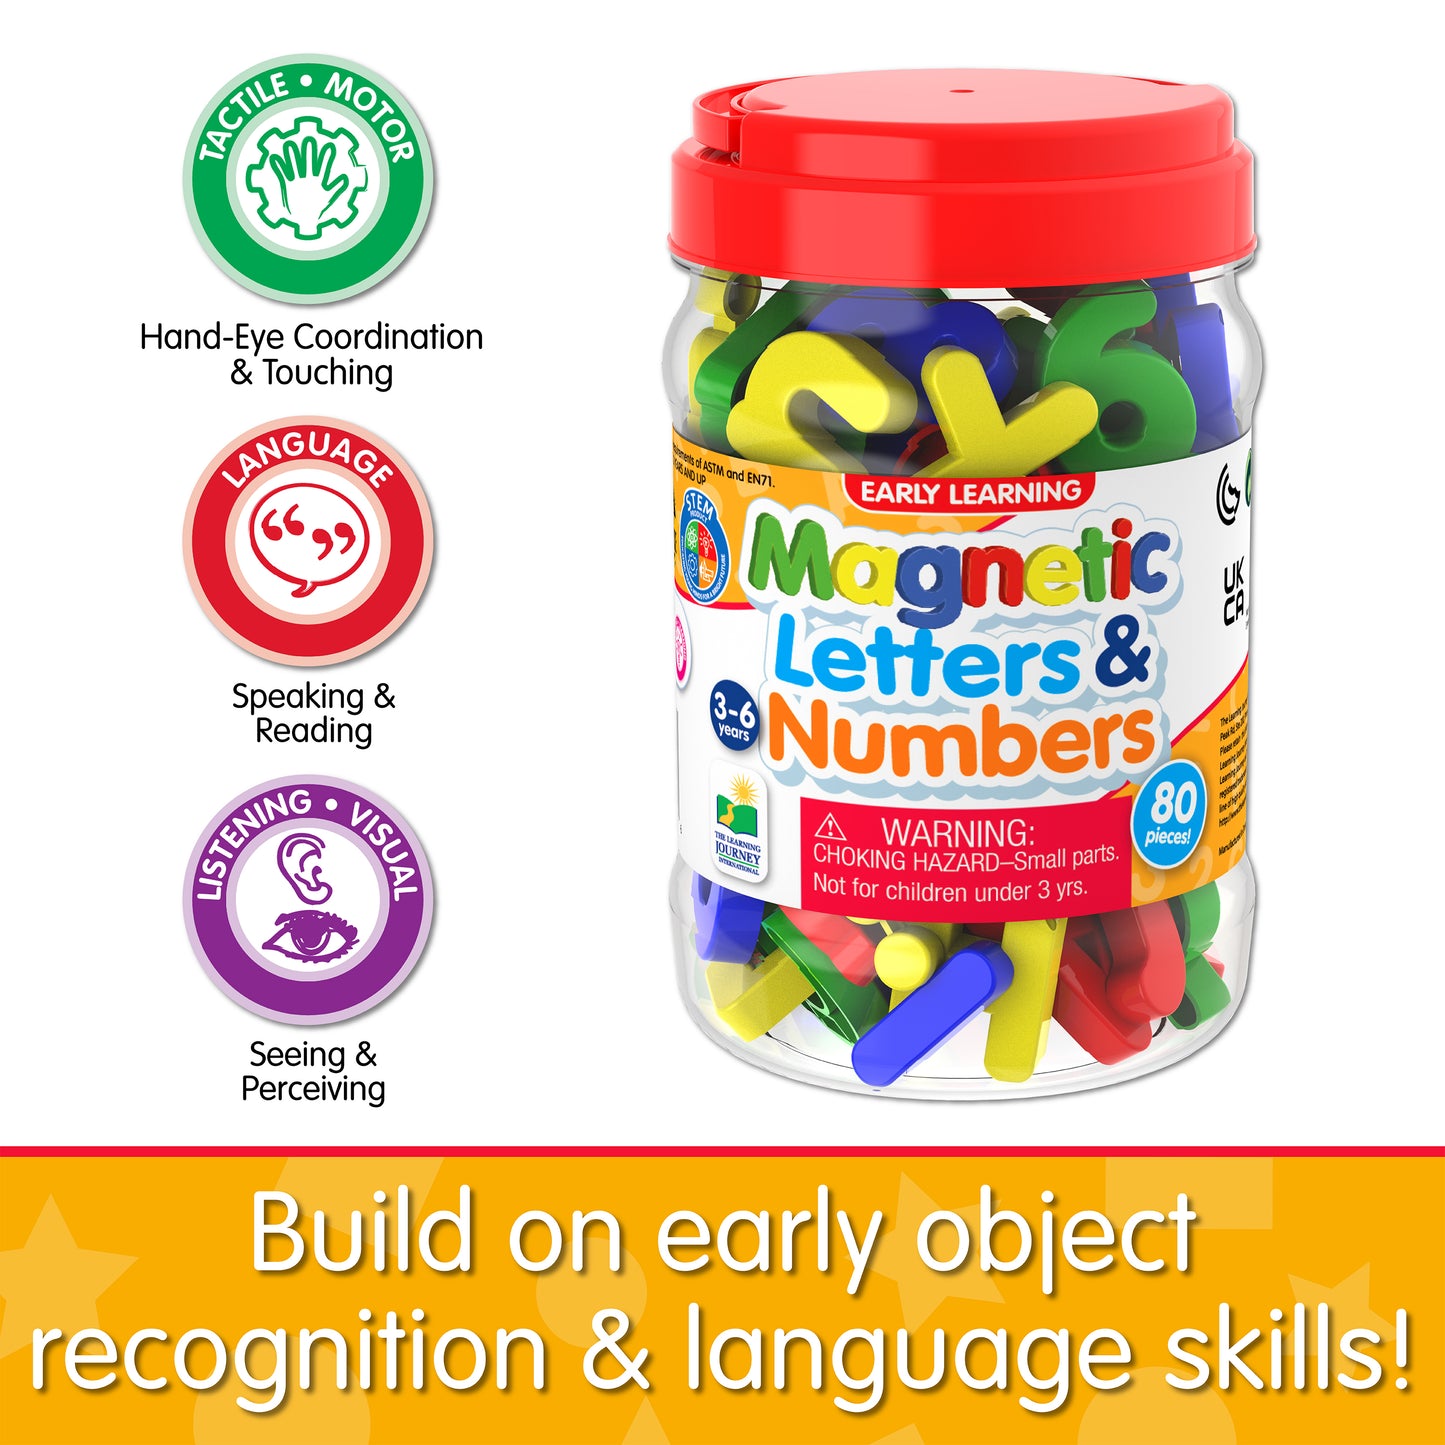 Infographic about Magnetic Letters and Numbers' educational benefits that says, "Build on early object recognition and language skills!"